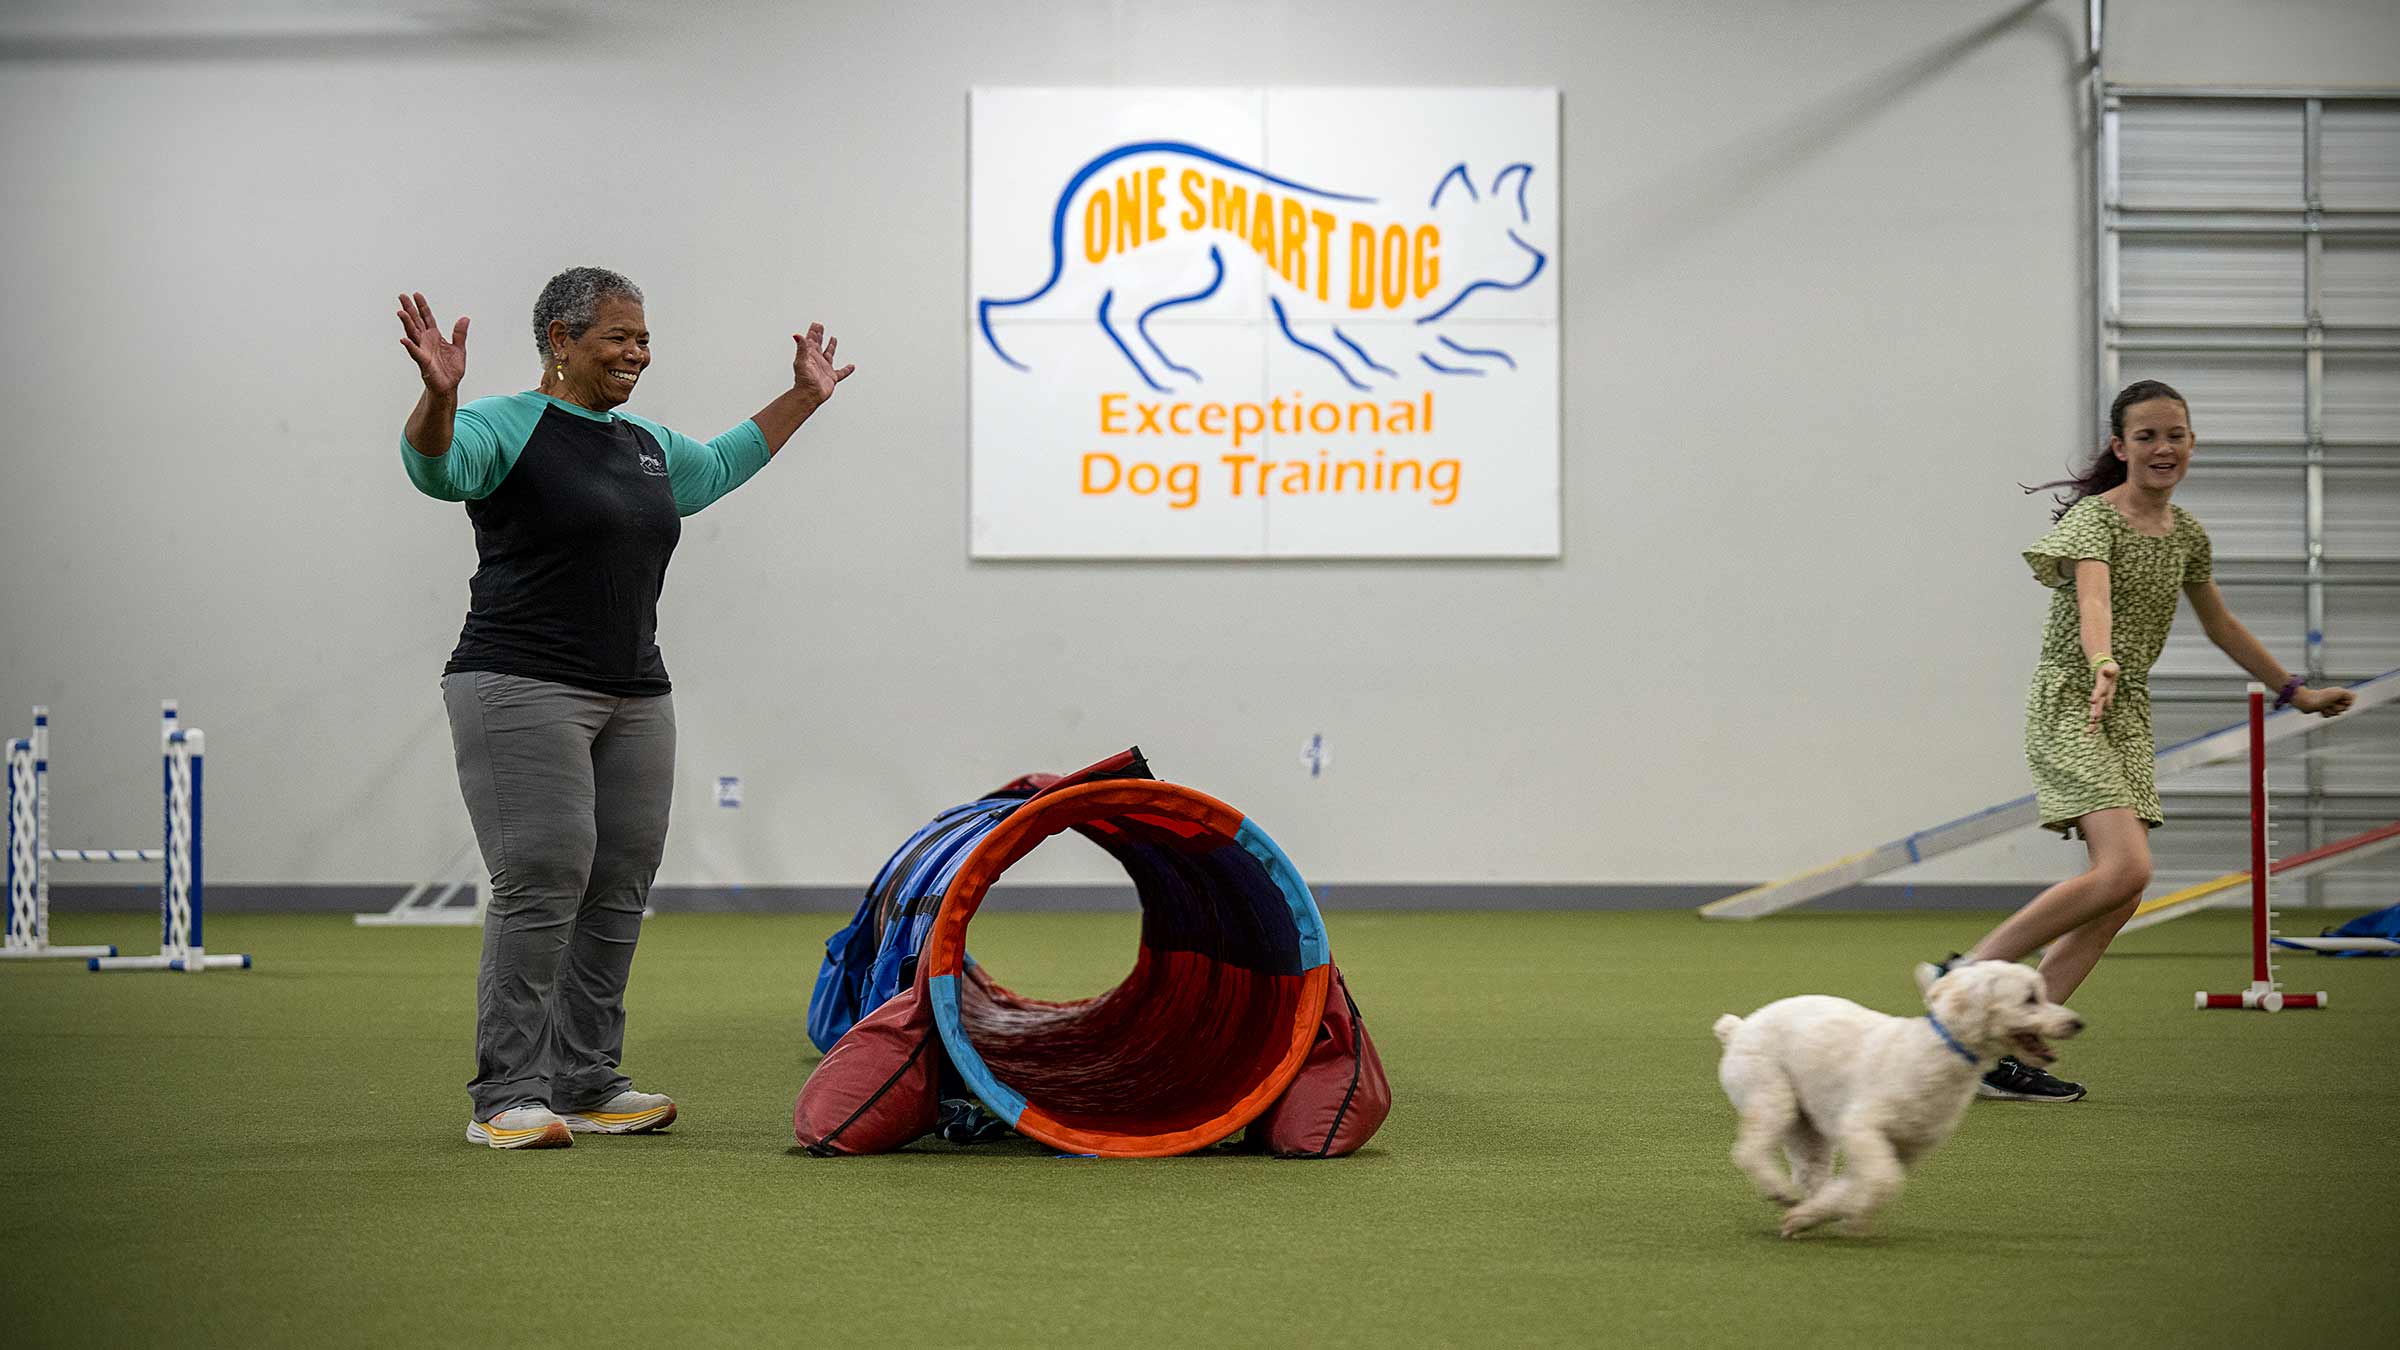 Dr. Randall during a dog training session